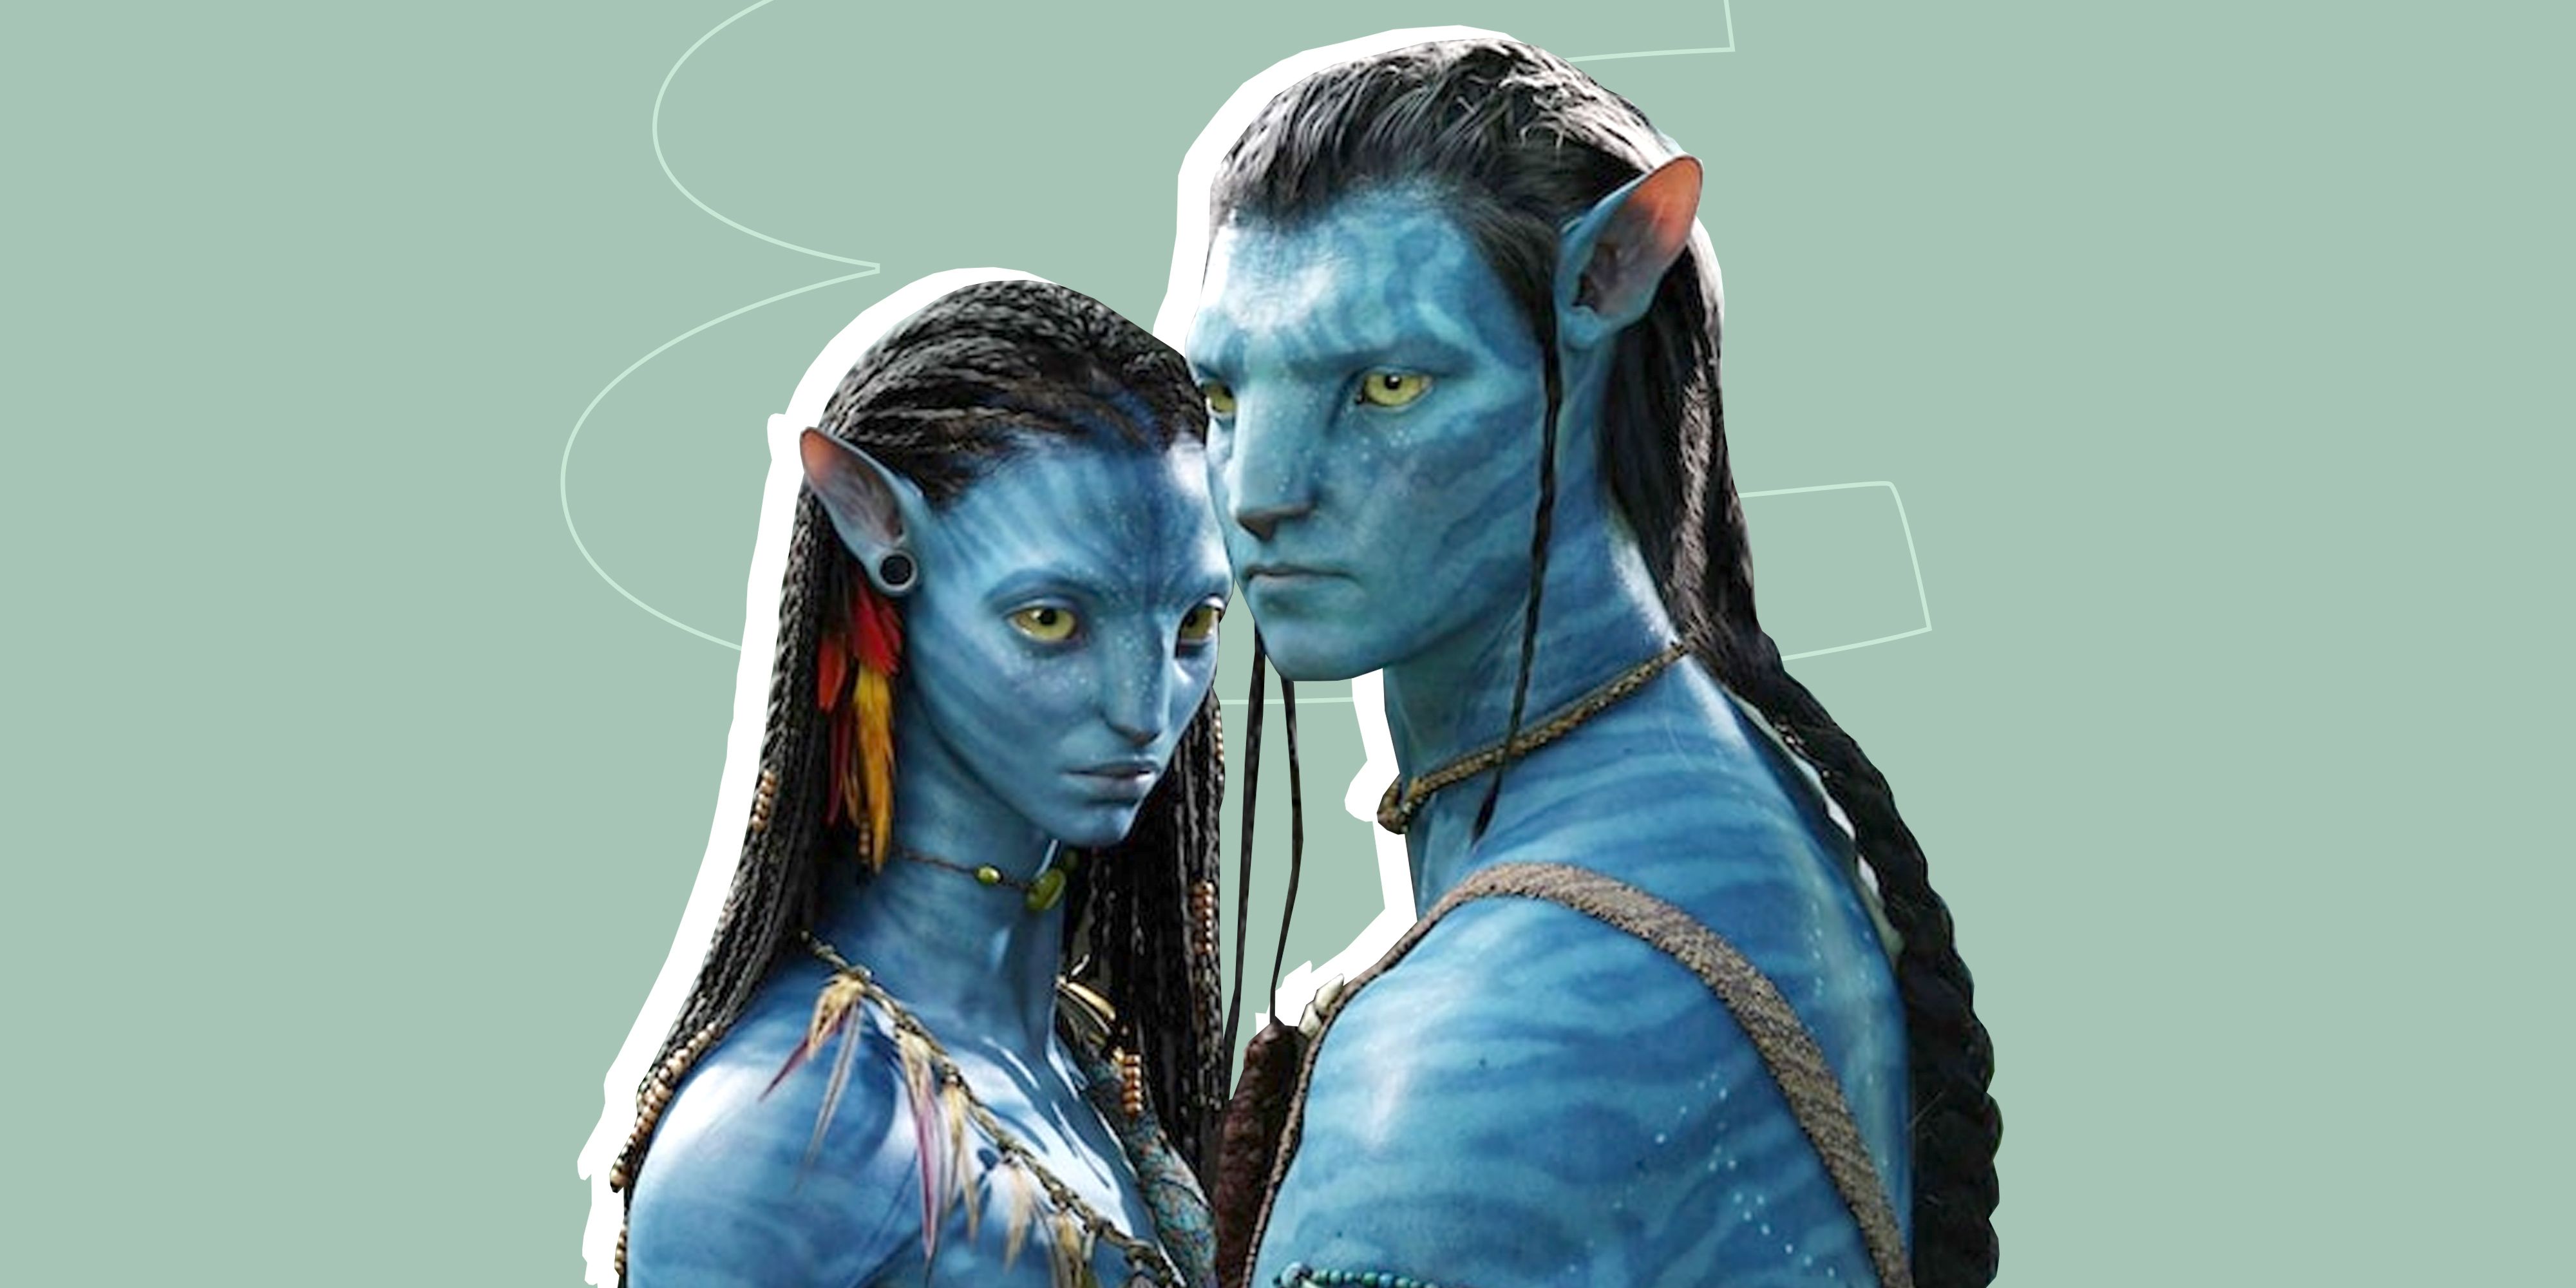 Chinas CovidHit Cinemas Hope Avatar Sequel Will Bring a Galactic Boost   Caixin Global